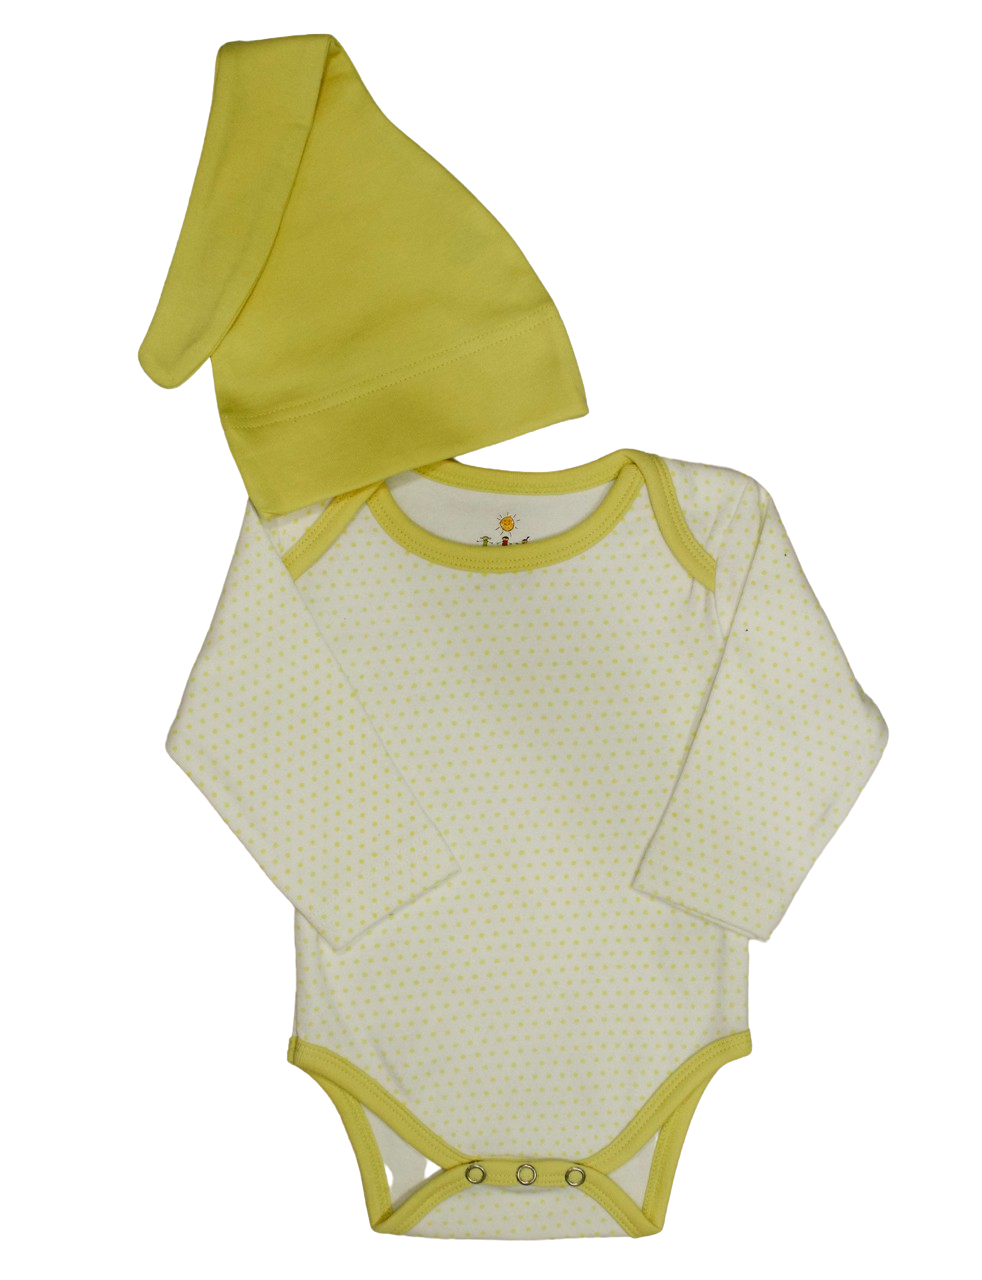 Snap Long Sleeve Body Suit & Hat